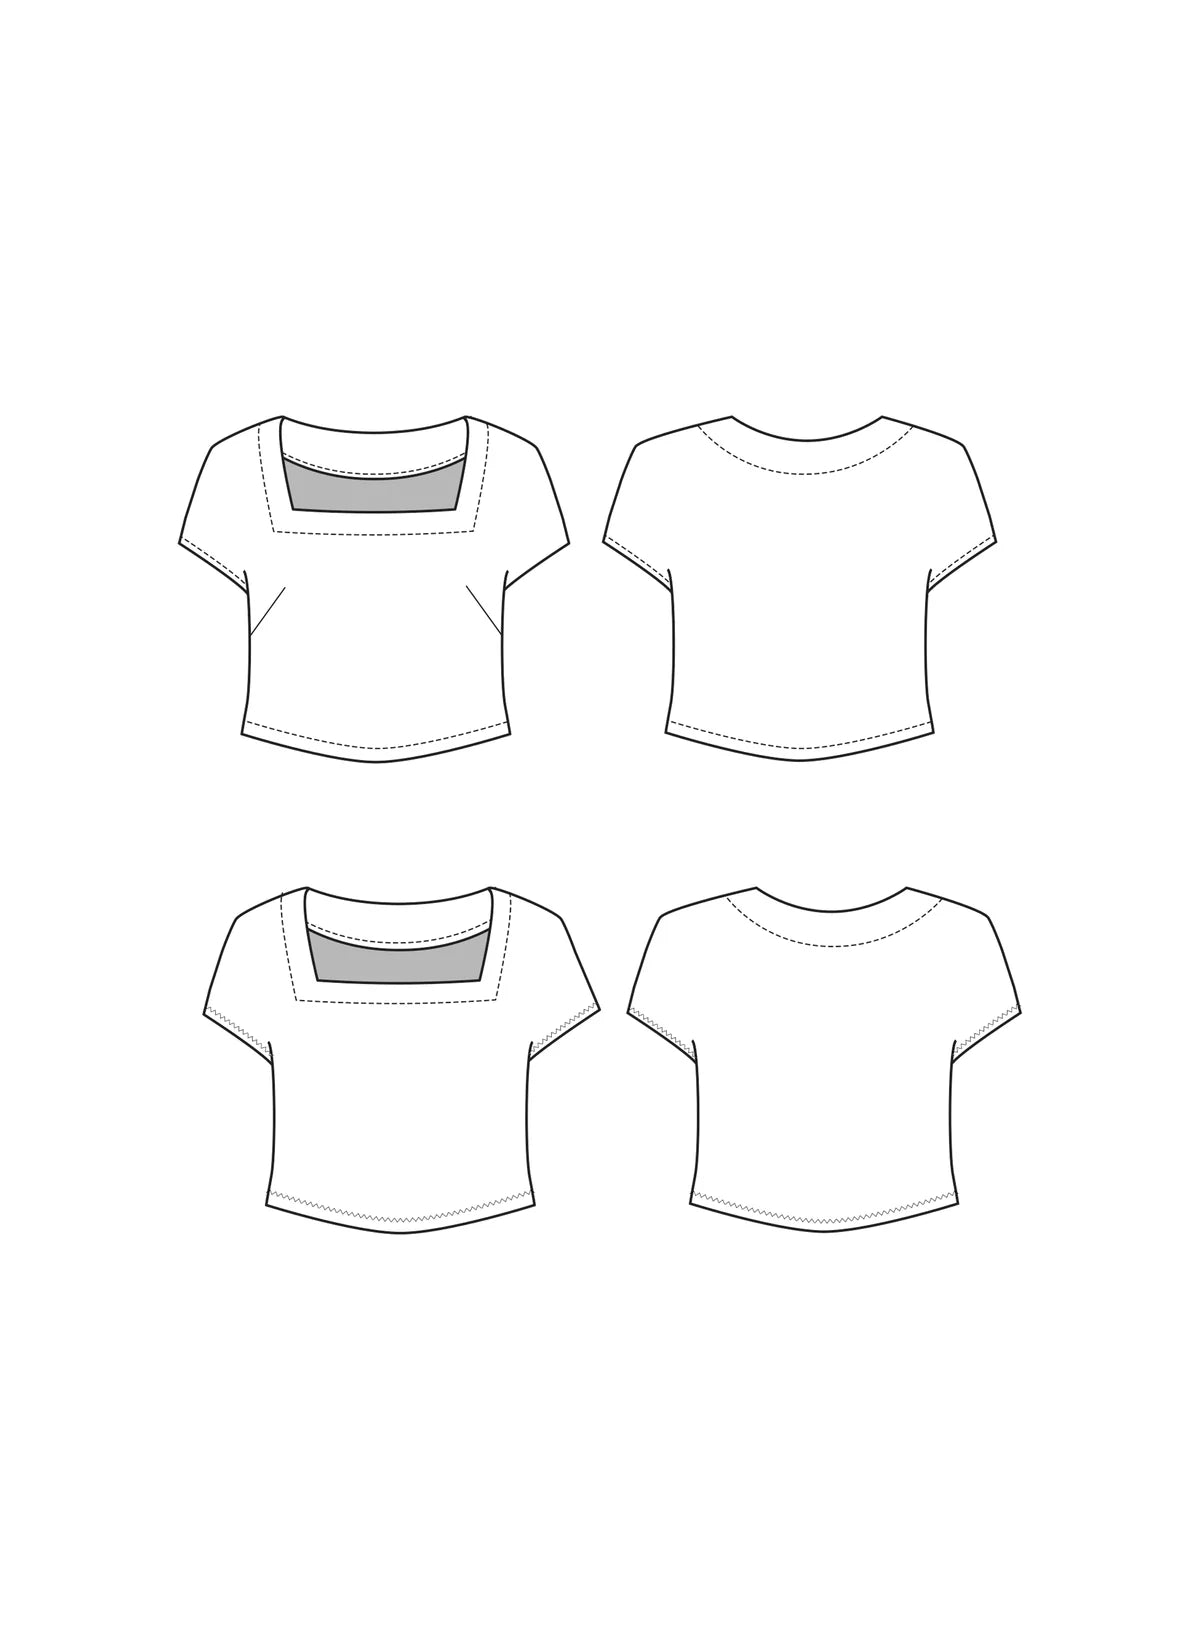 Friday Pattern Co. • Square Neck Top Sewing Pattern